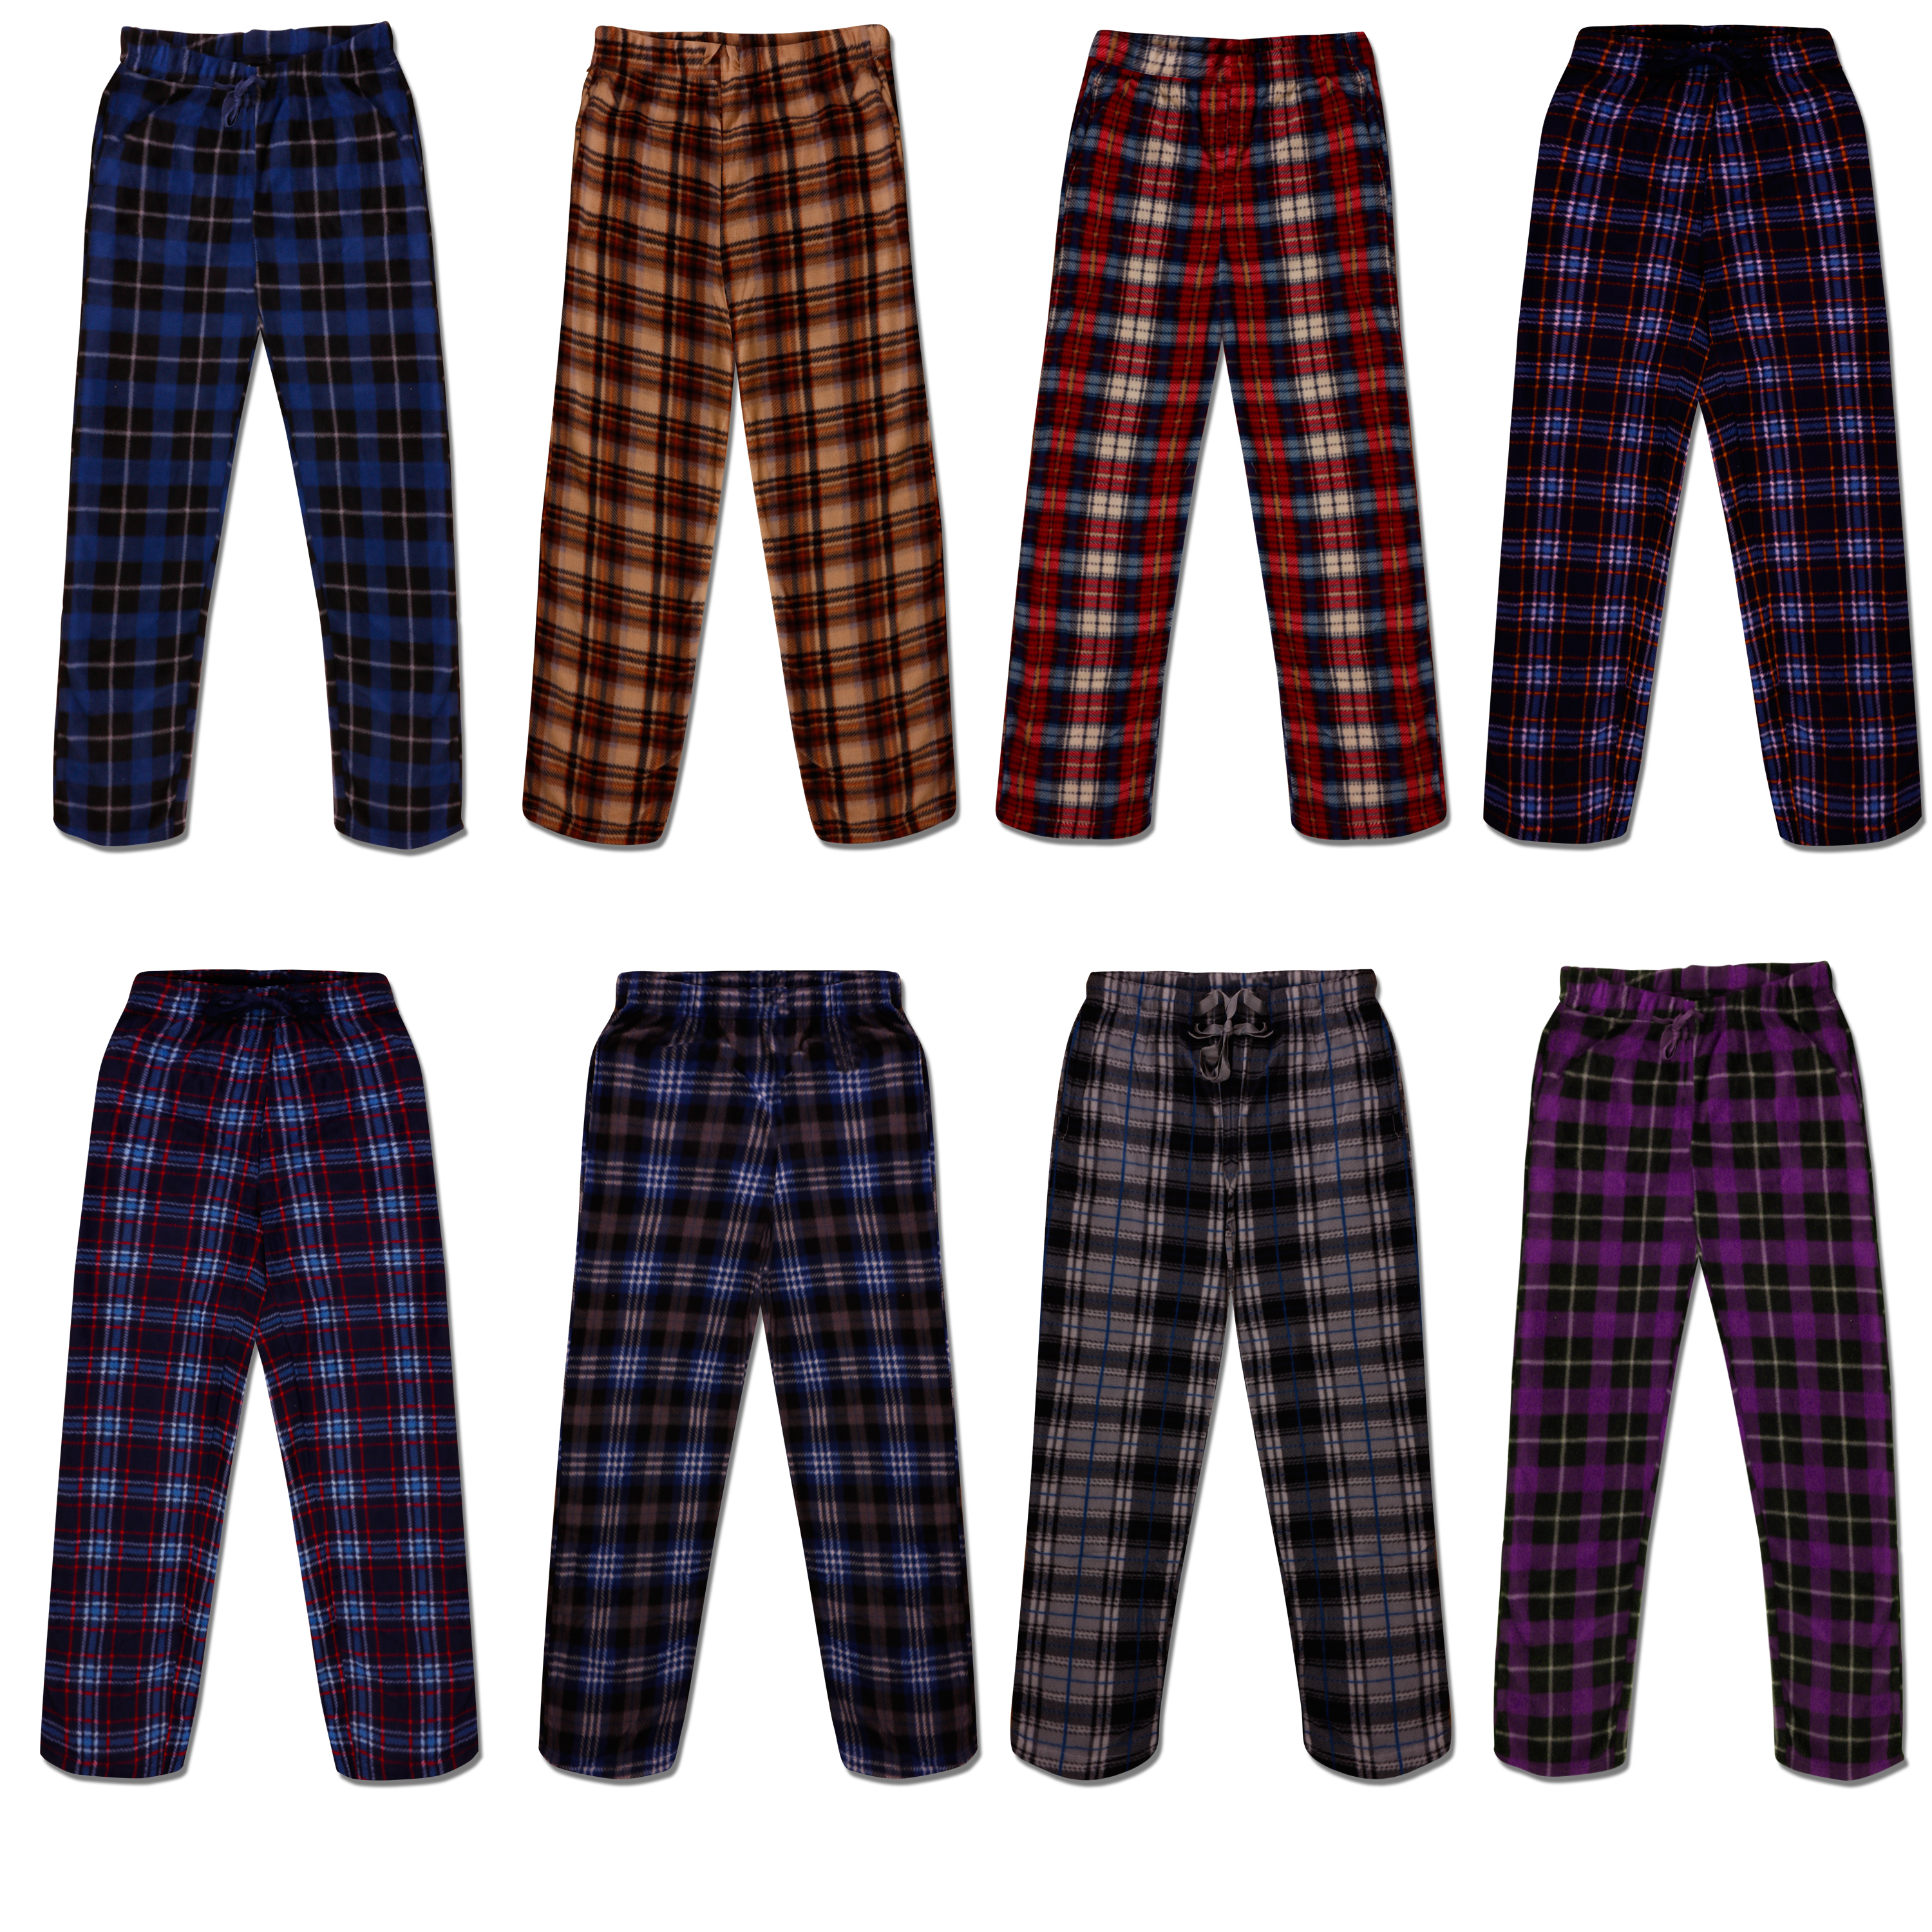 Multi-Pack: Men's Ultra Soft Flannel Plaid Pajama Lounge Pants - 1-Pack, Small